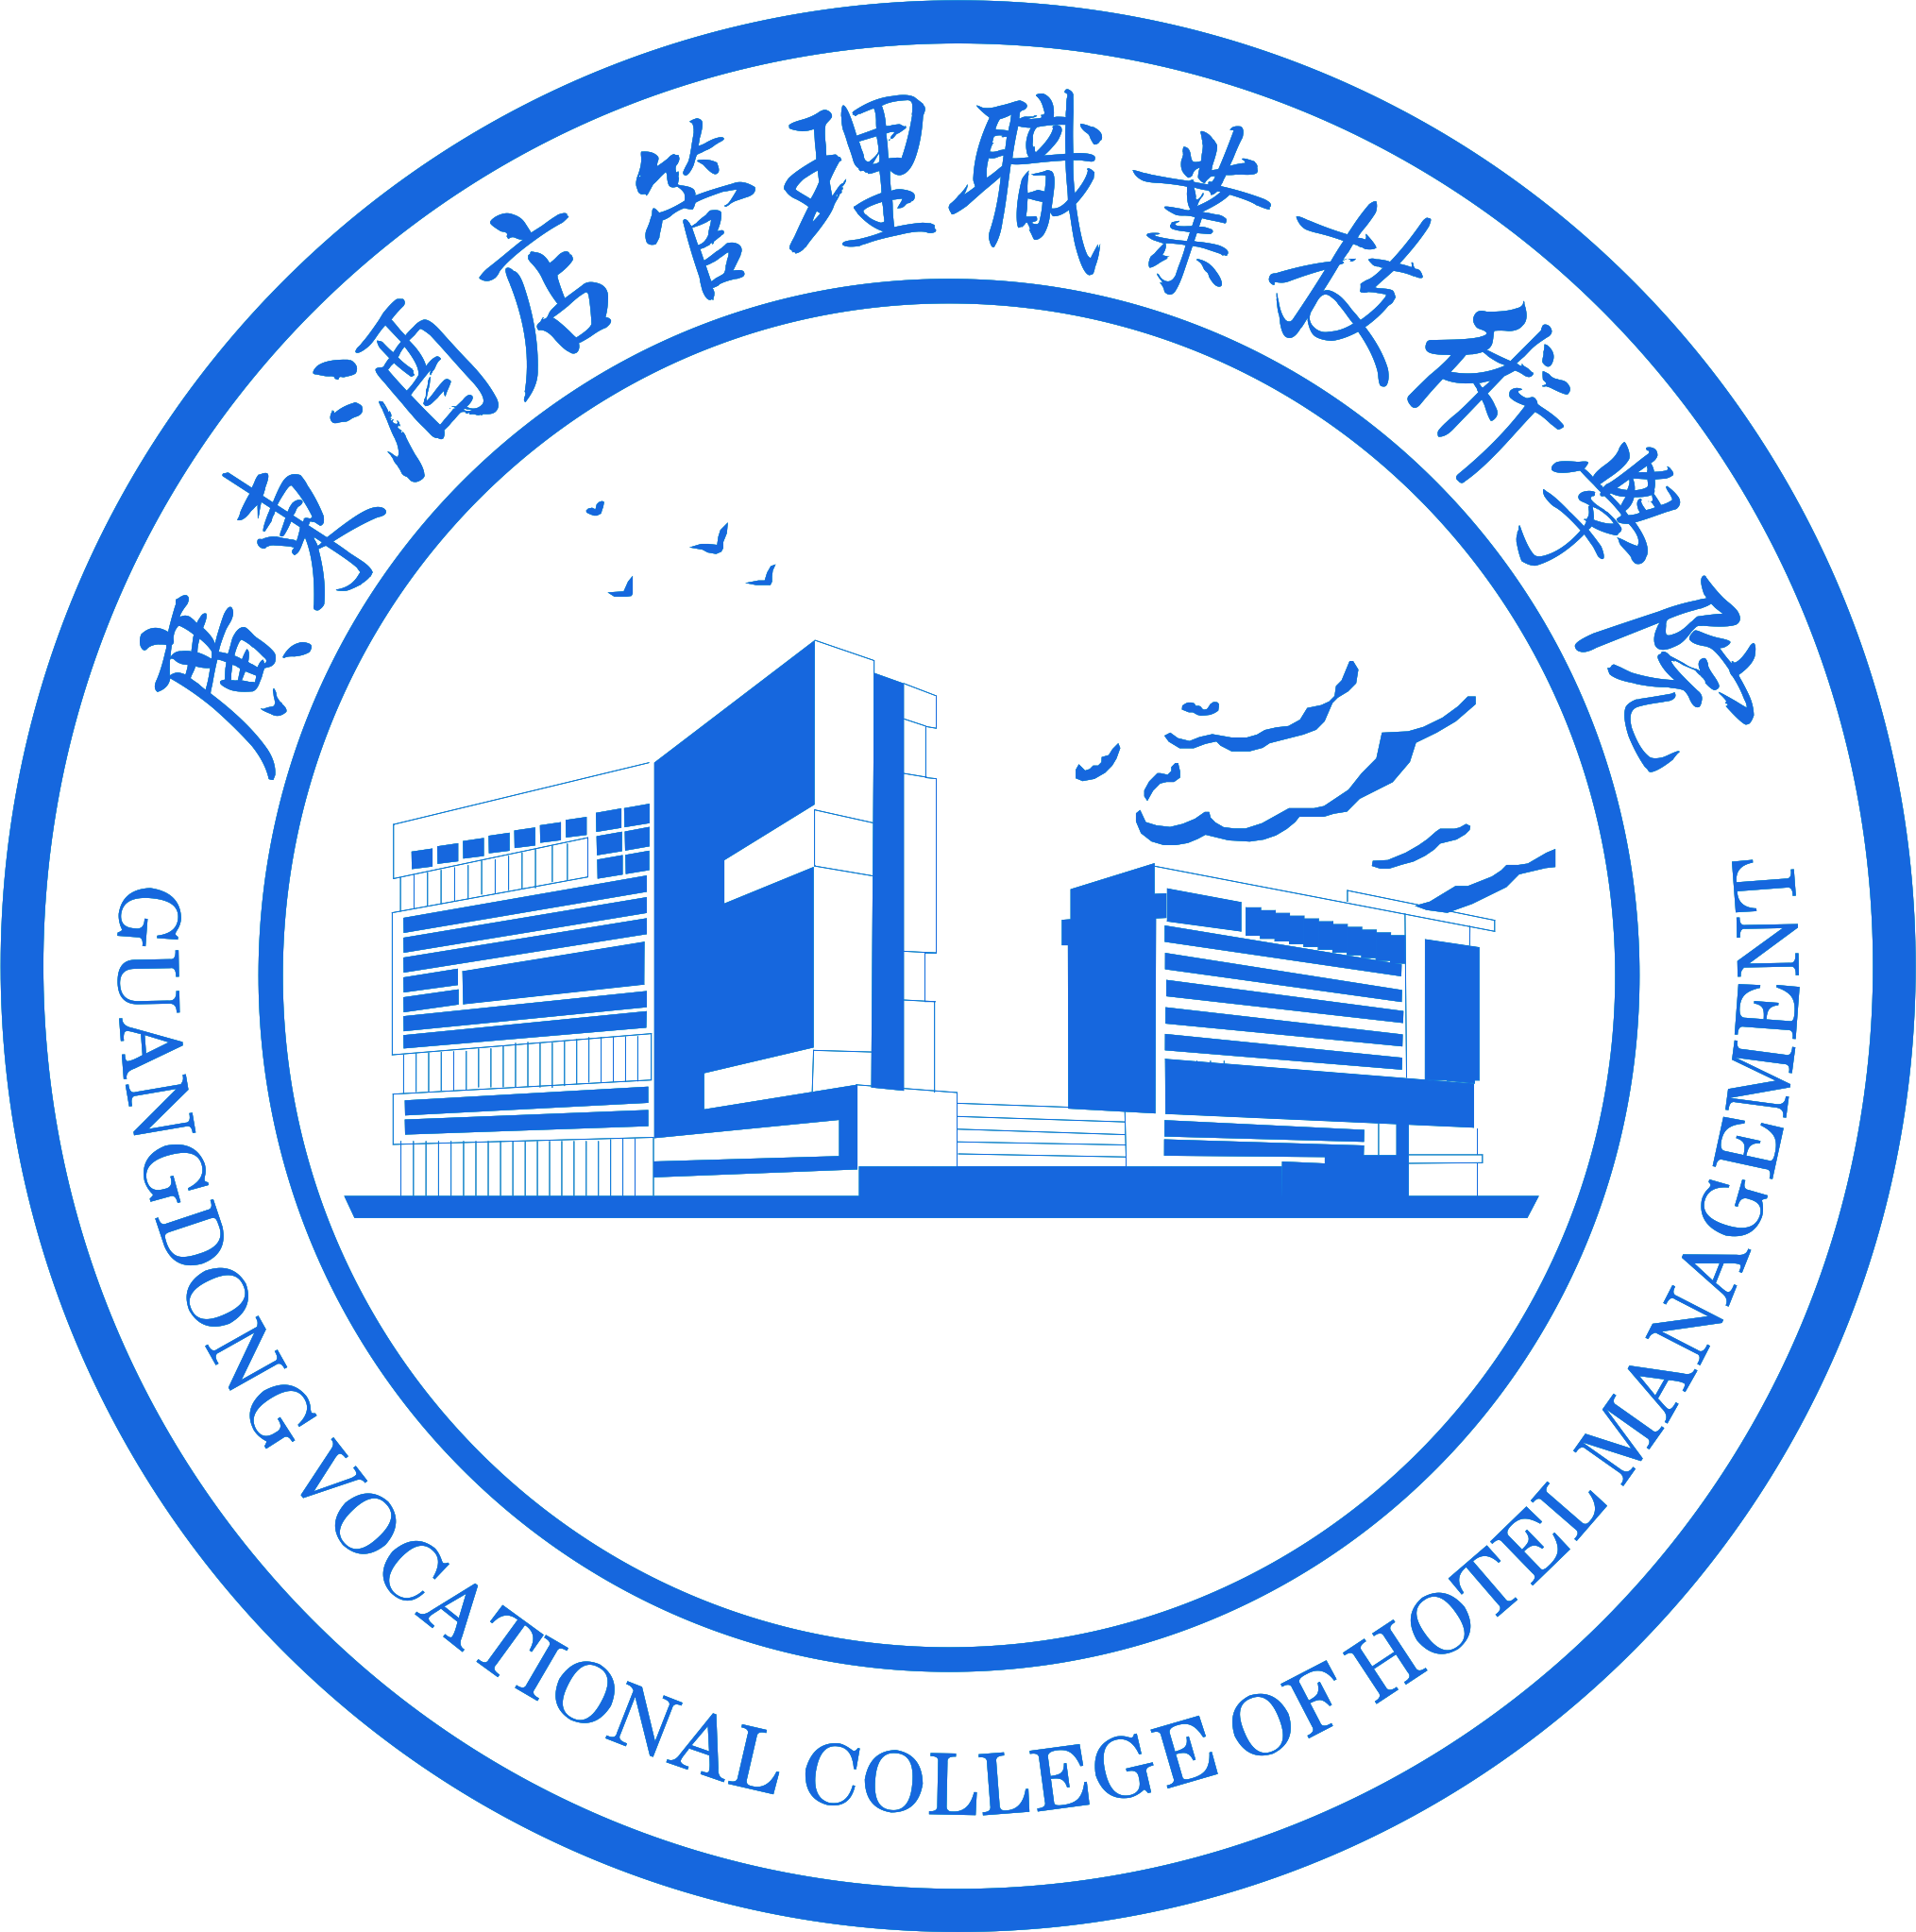 GUANGDONG VOCATIONAL COLLEGE OF HOTEL MANAGEMENT